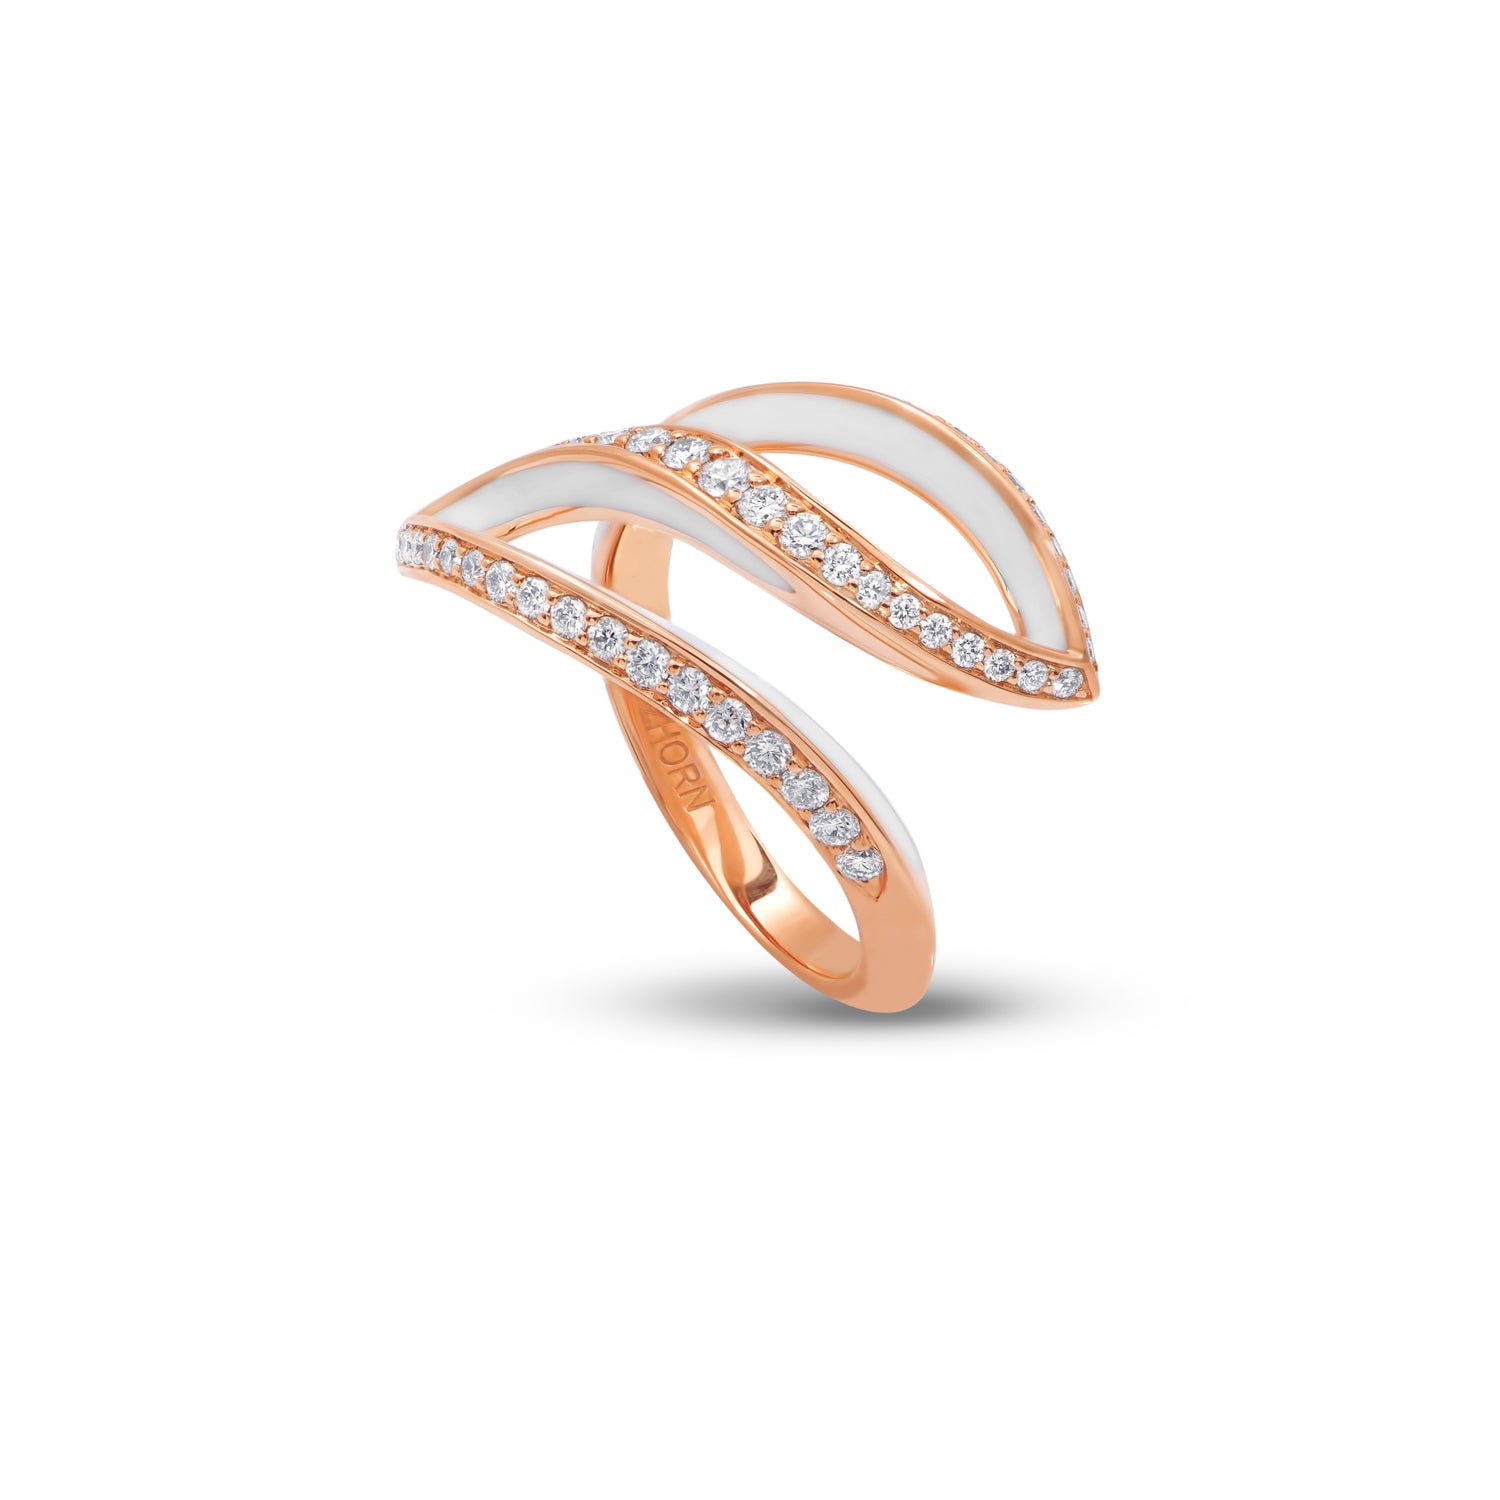 VIVA small Curved Ring with Diamond and White Enamel